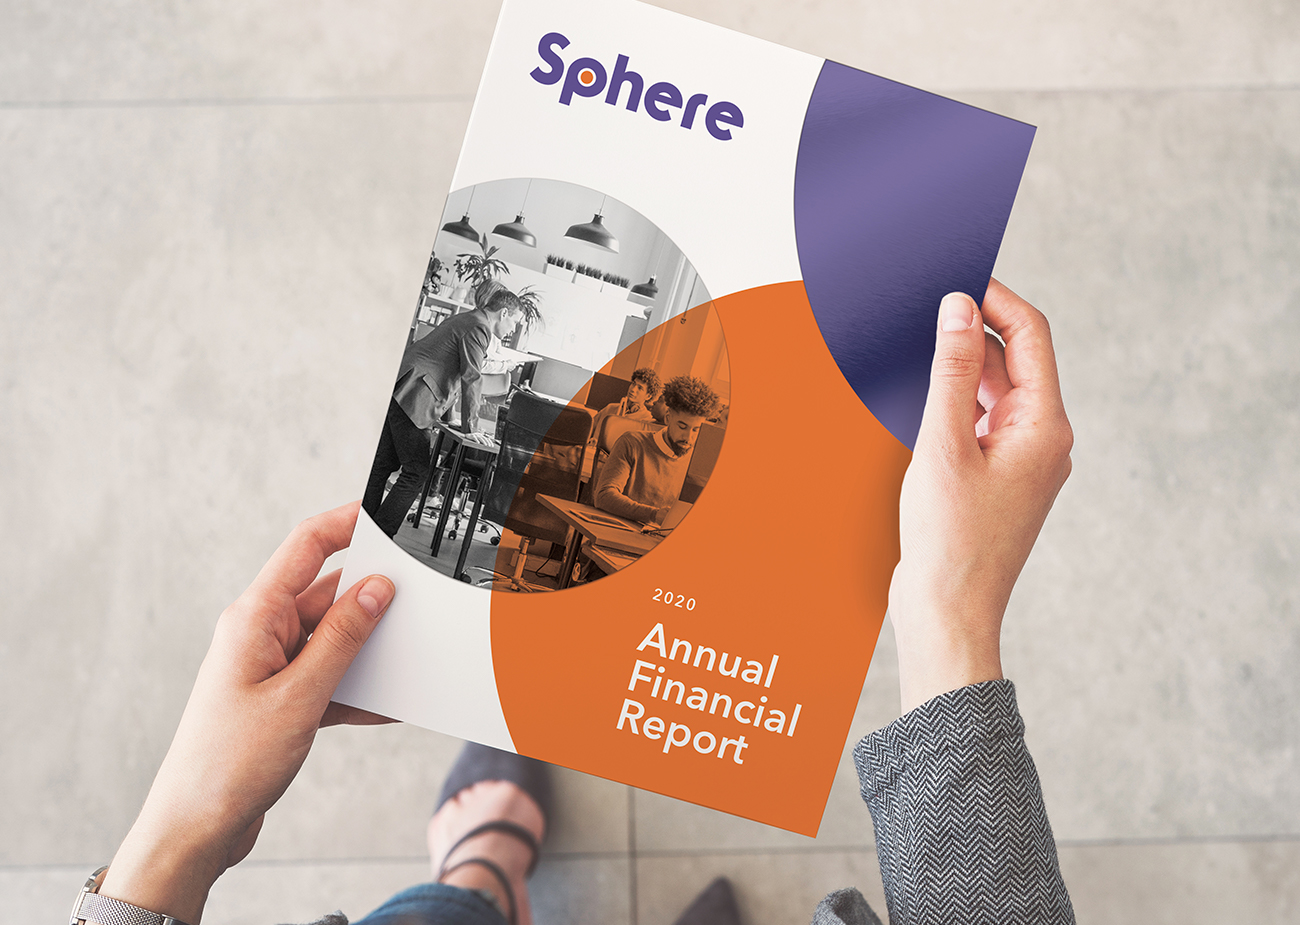 Example of digitally printed annual report